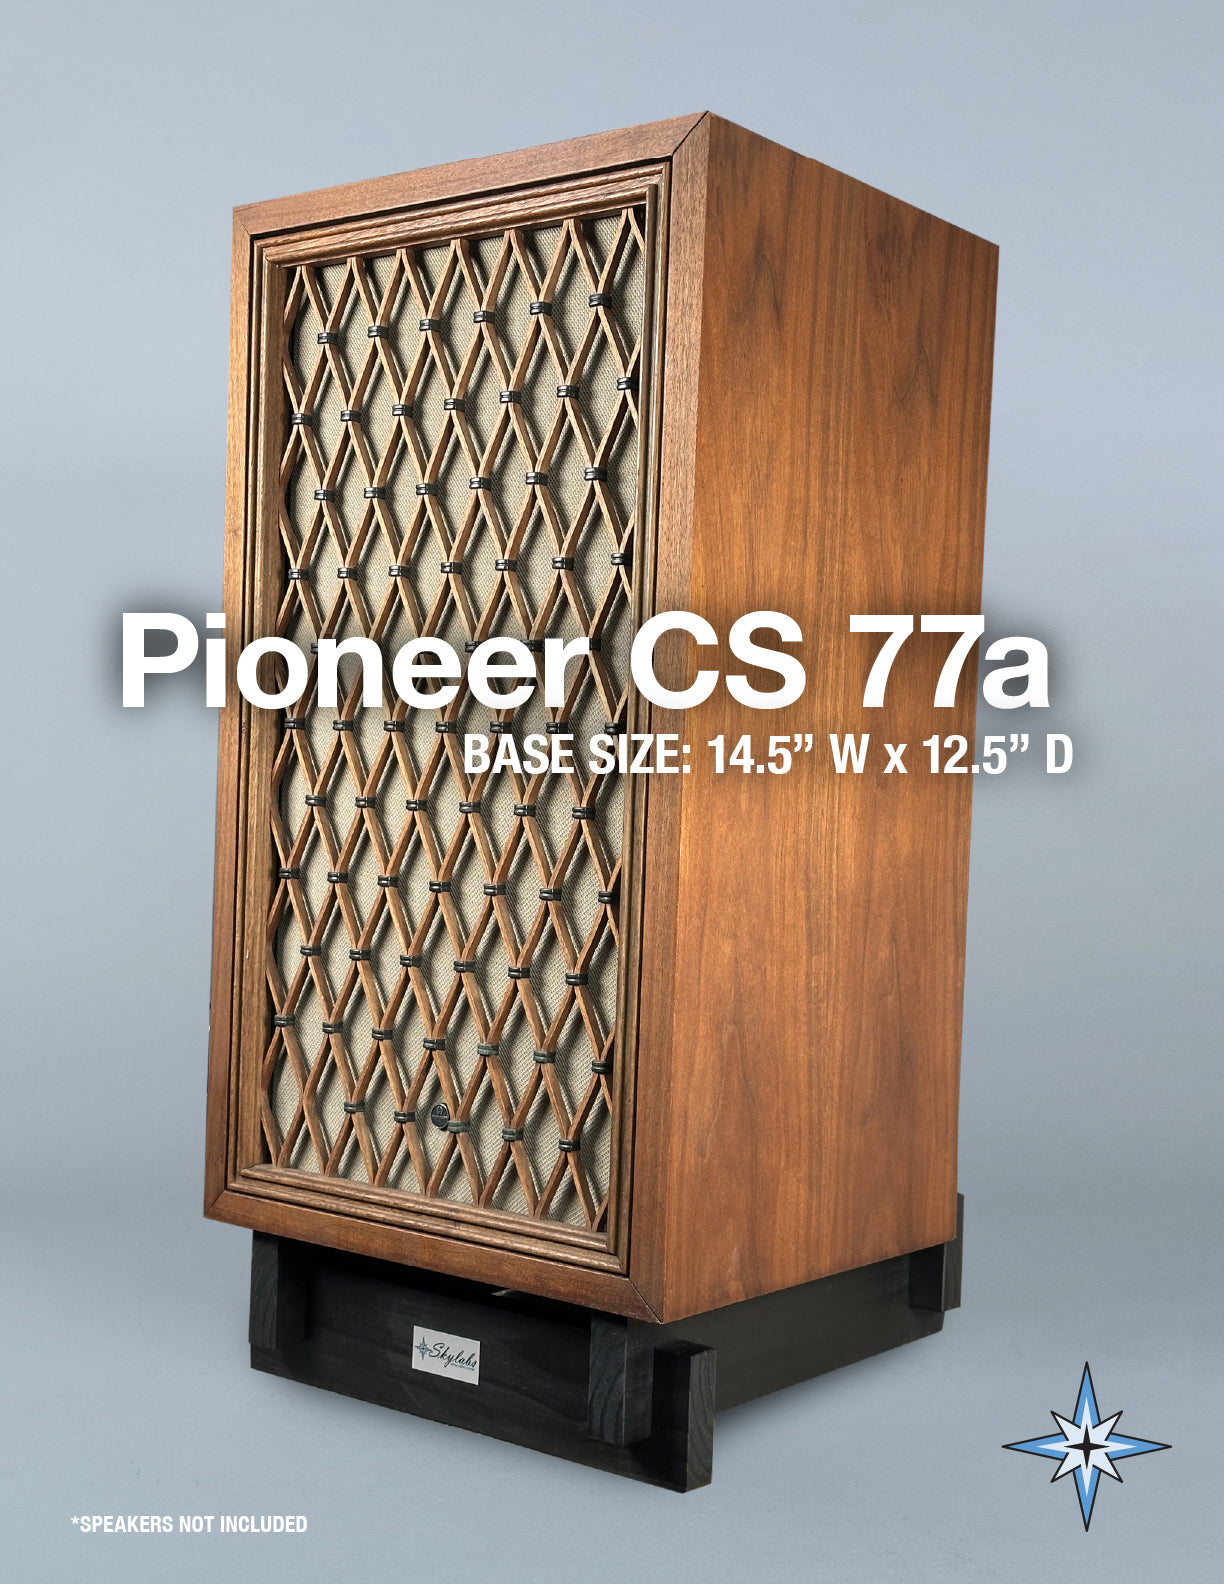 Speaker Stands 2 for Pioneer CS 77a@2x-100